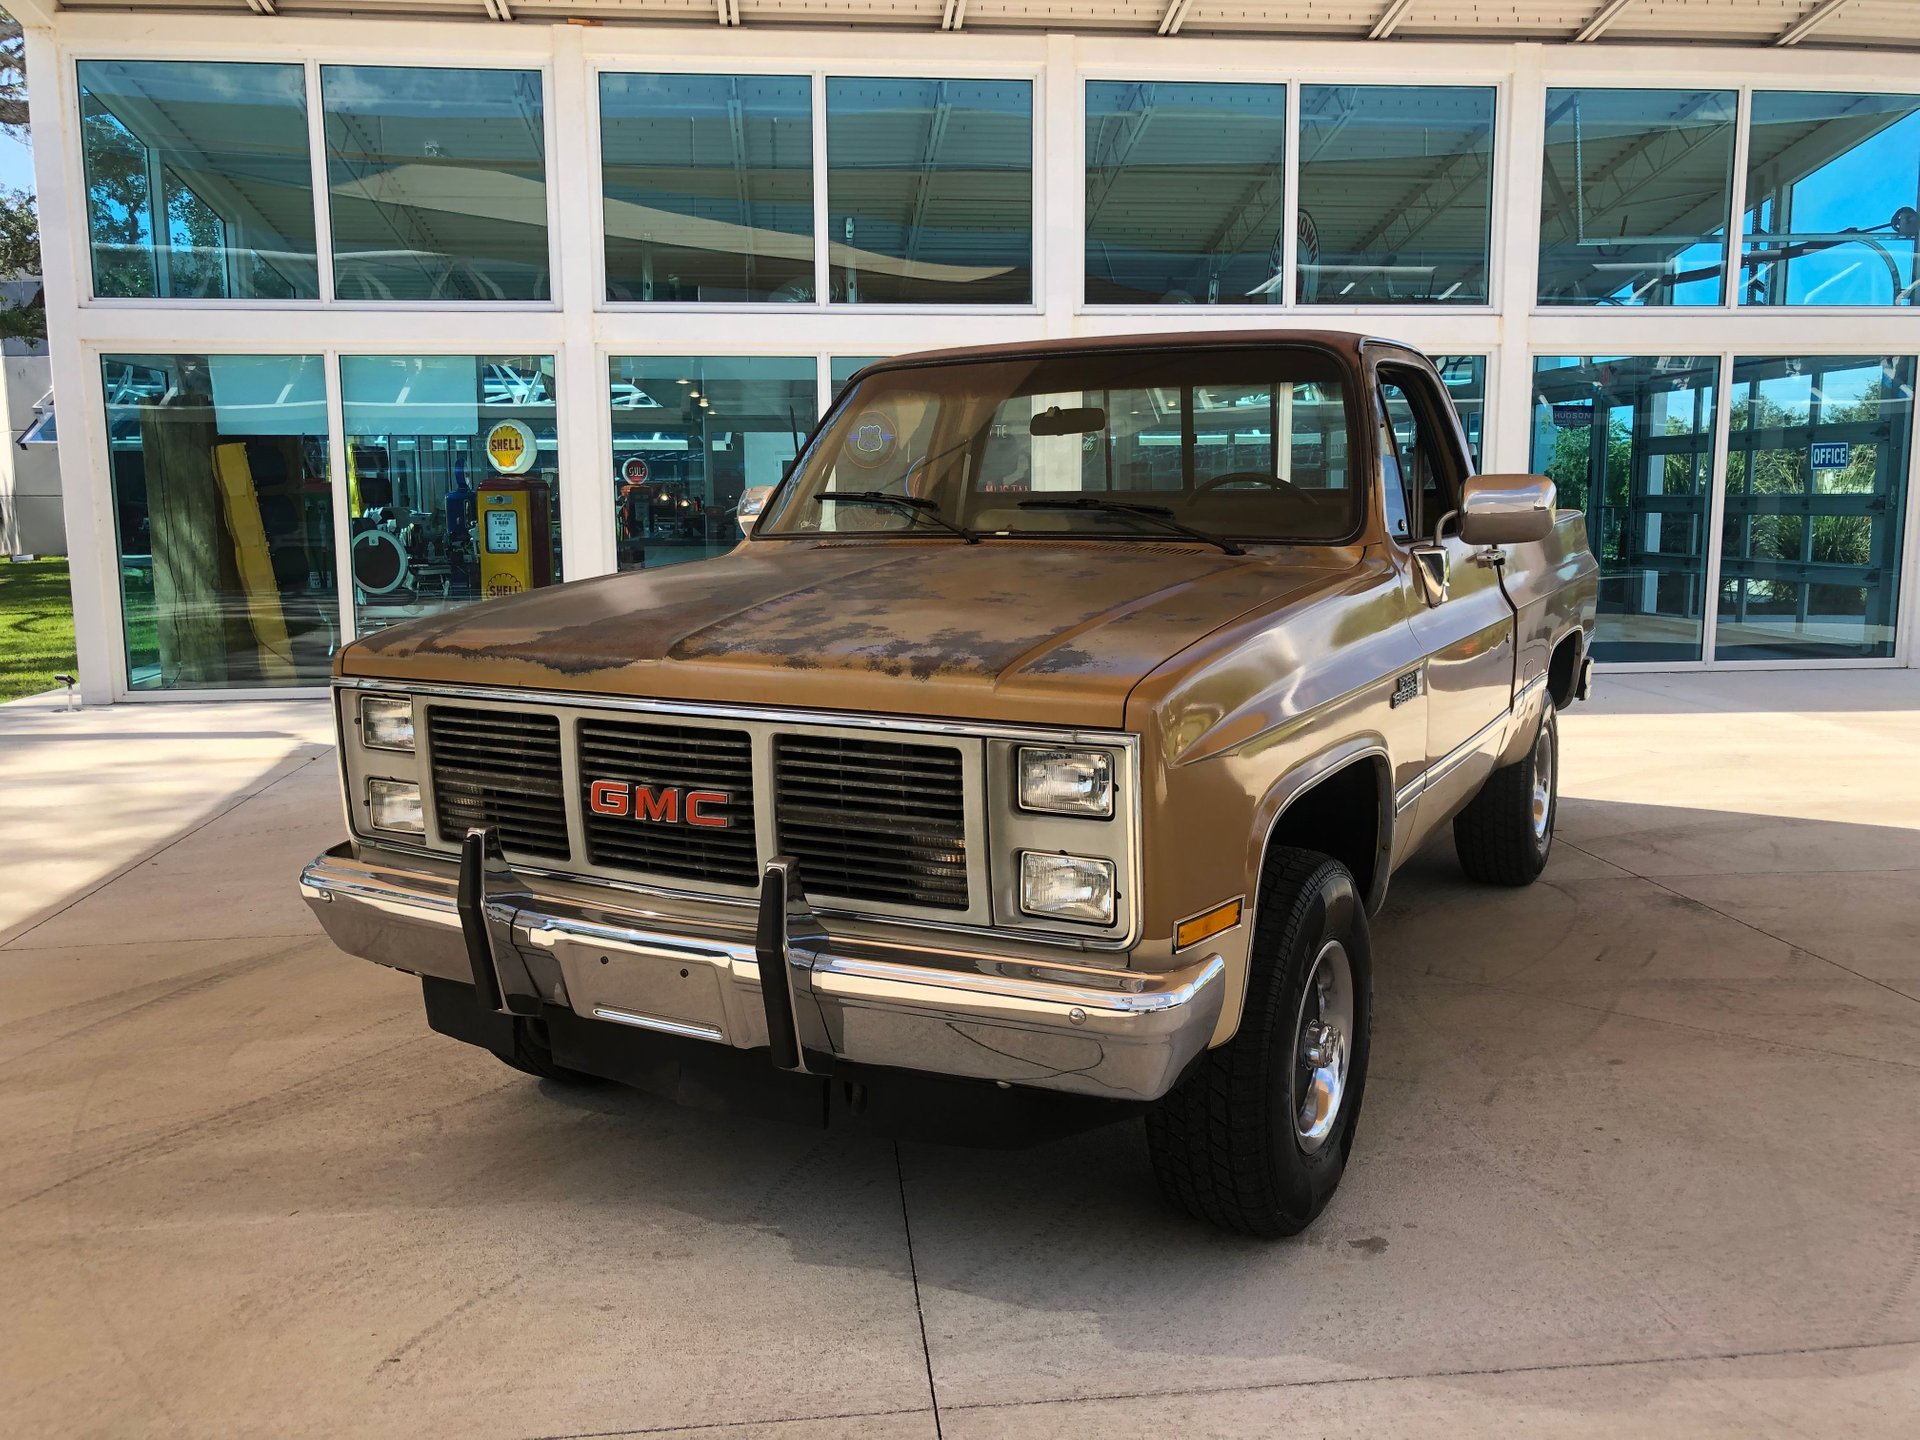 1985 Gmc High Sierra Classic Cars And Used Cars For Sale In Tampa Fl